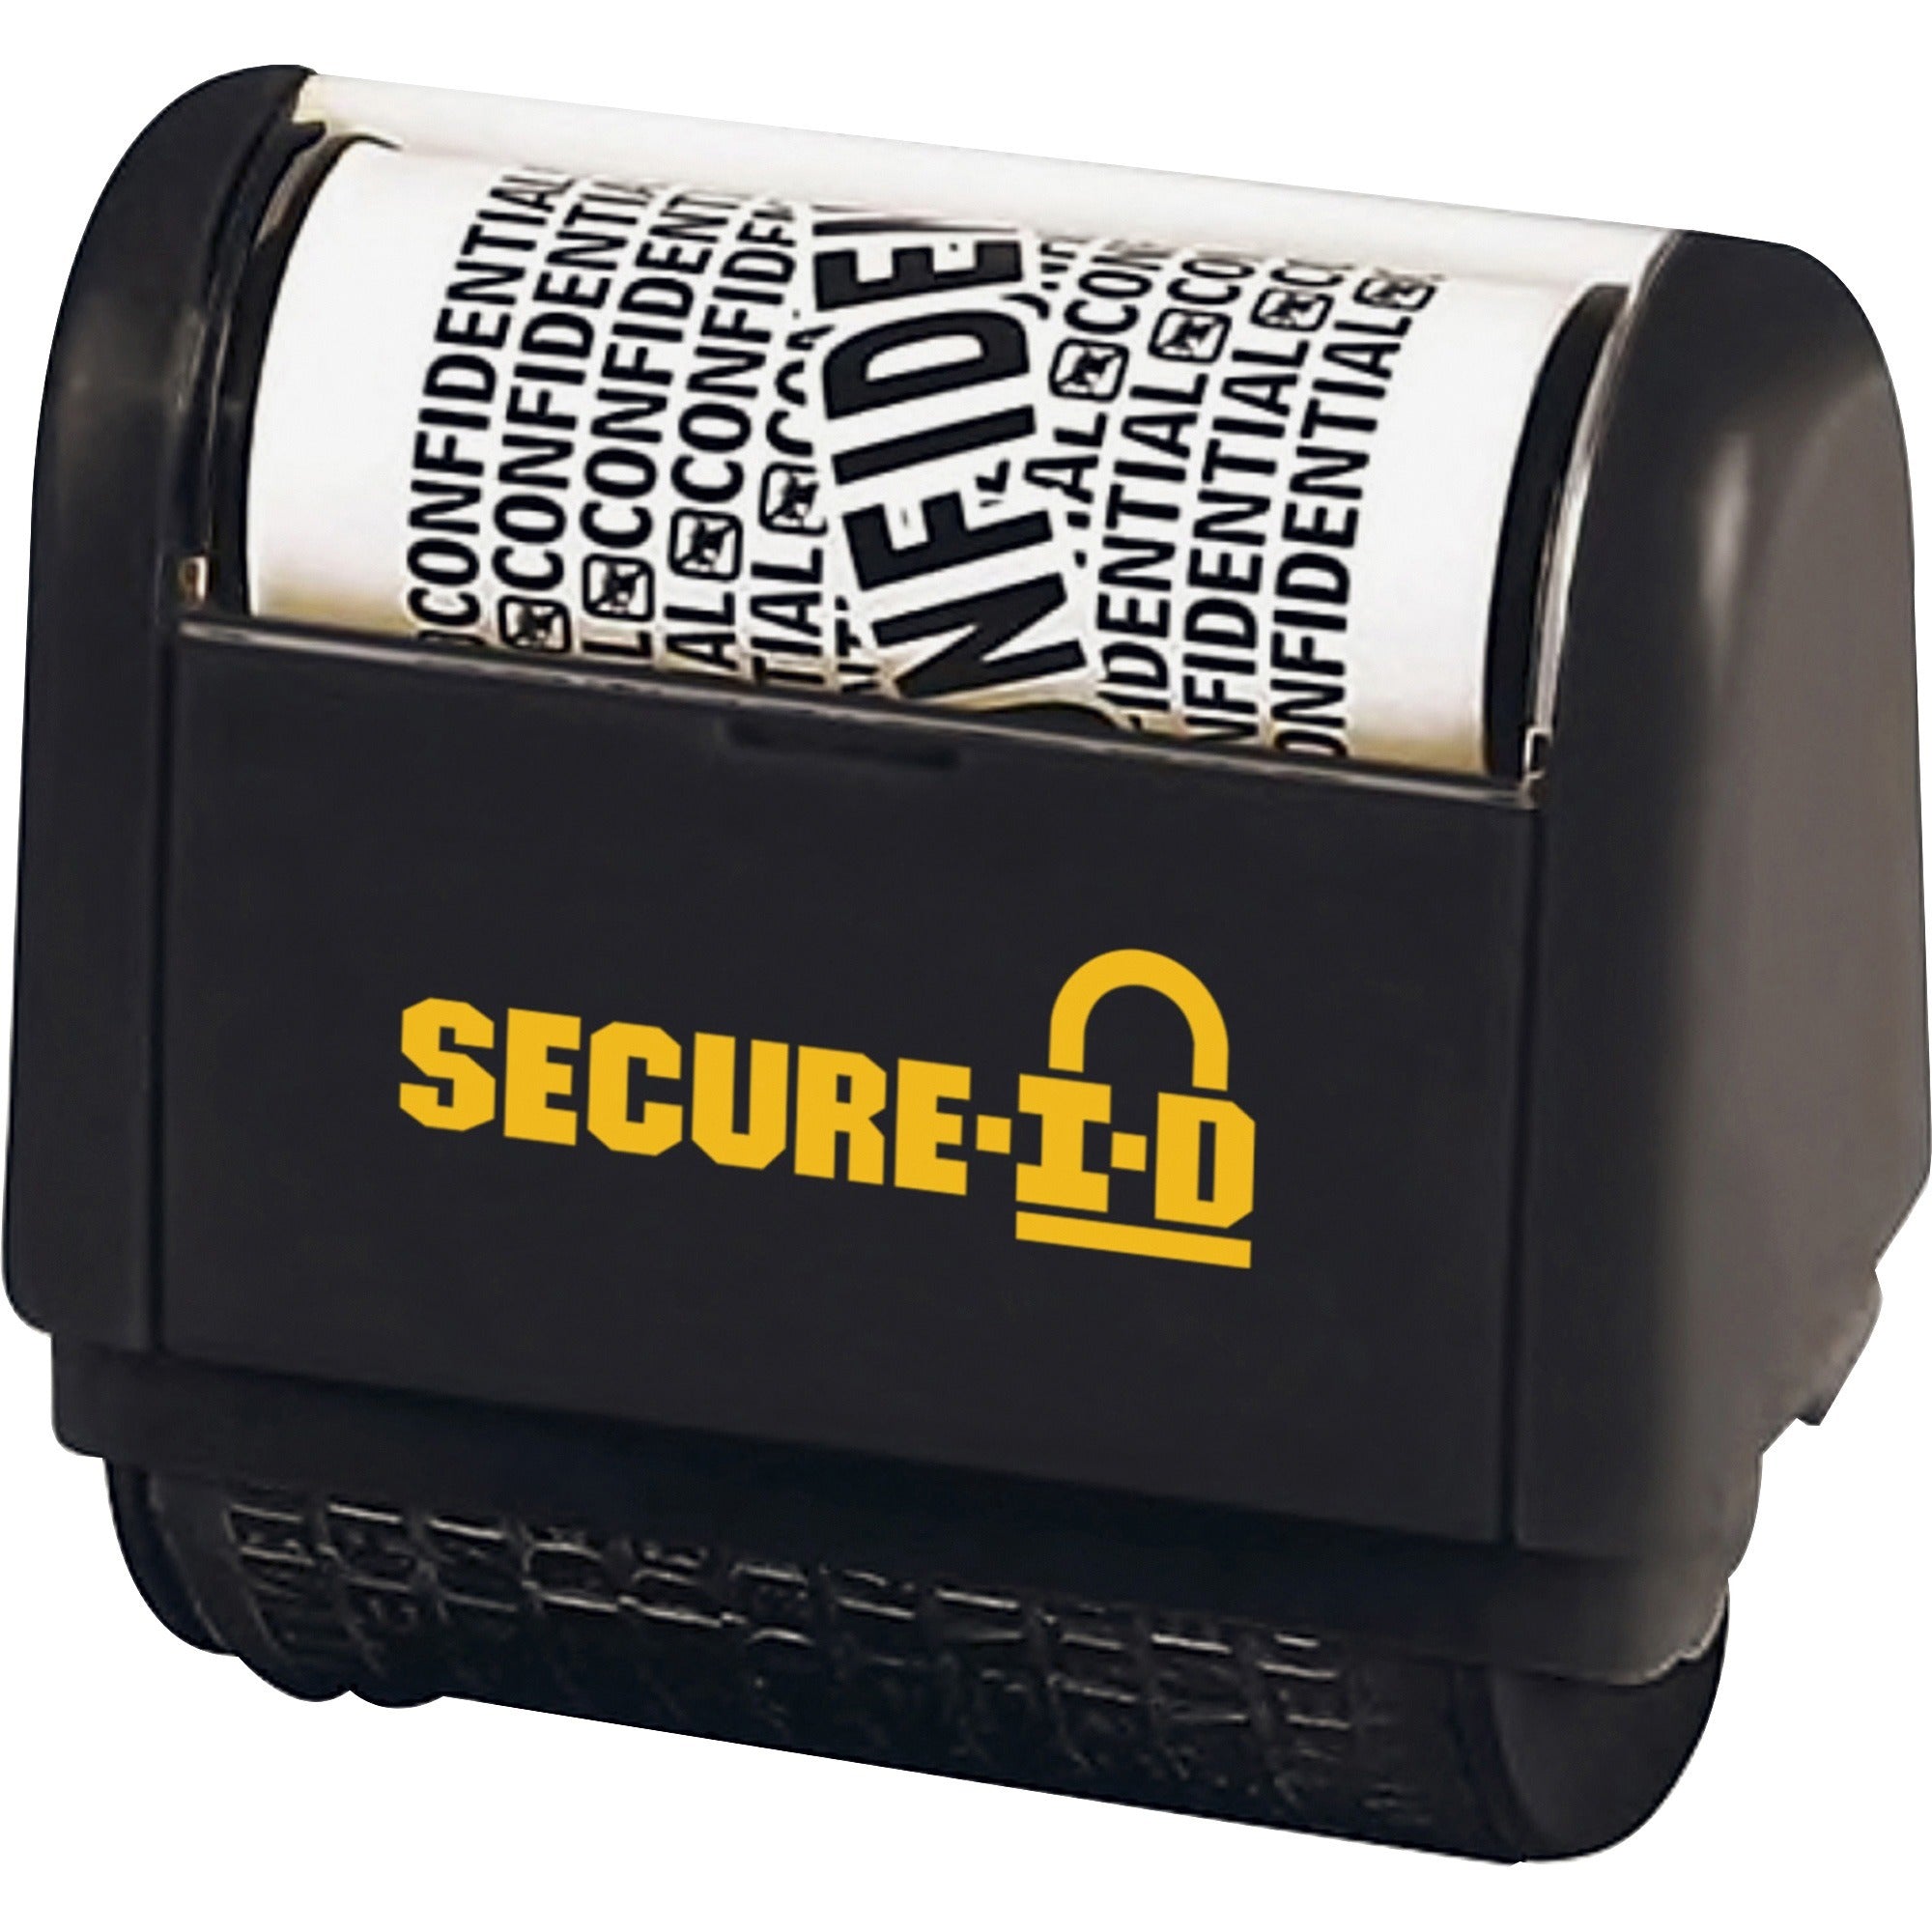 consolidated-stamp-secure-i-d-personal-security-roller-stamp-confidential-150-impression-length-black-1-pack_cos035510 - 1